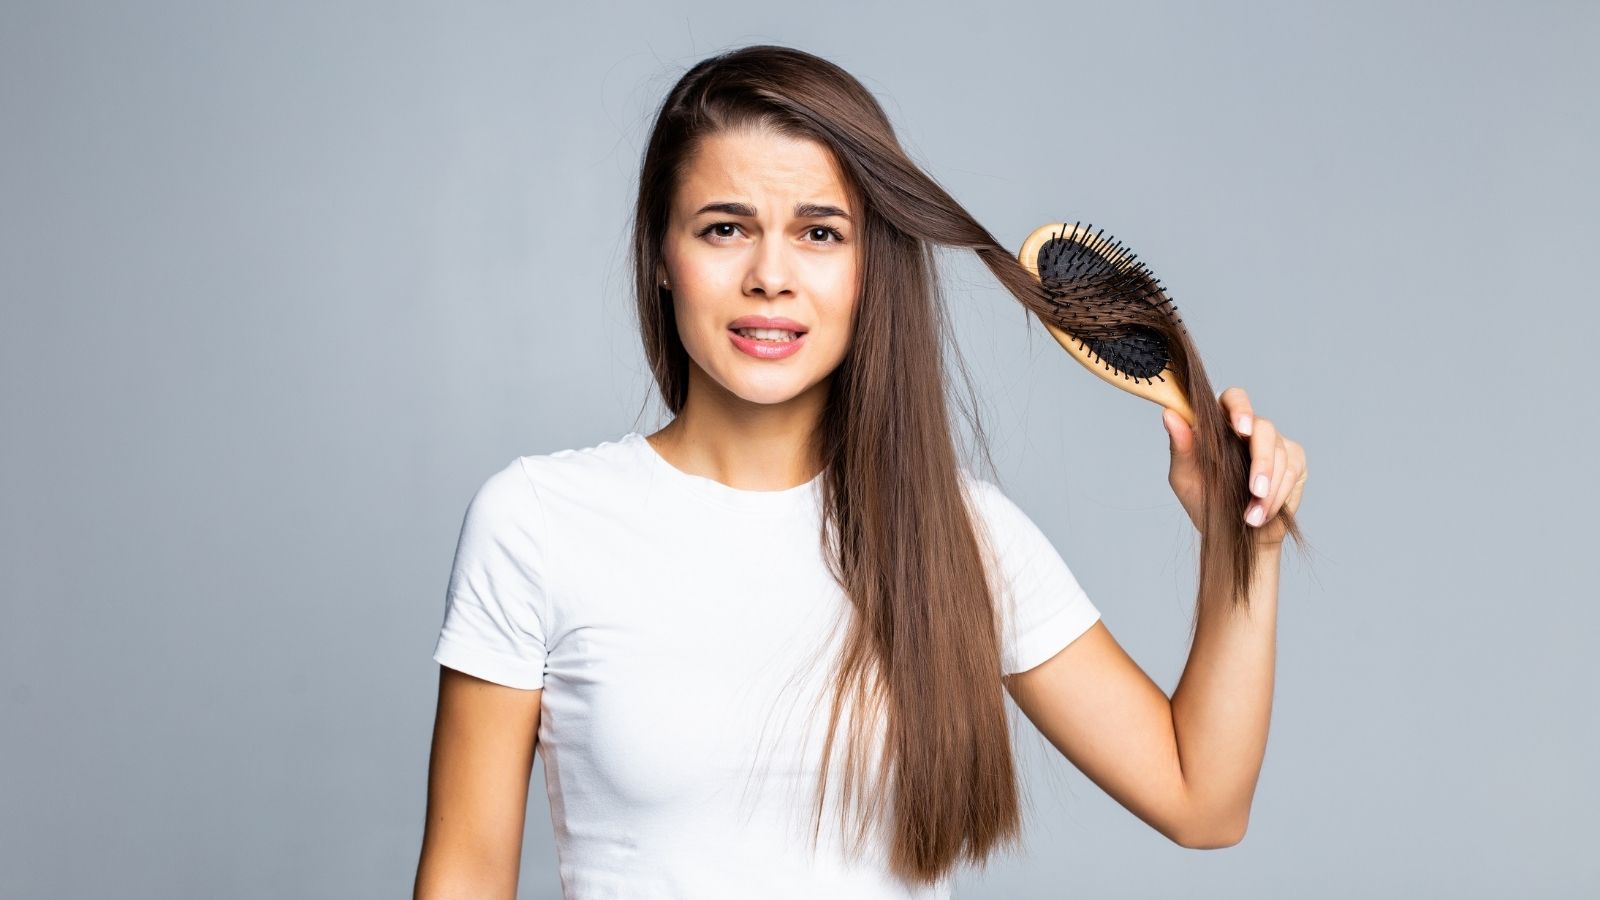 Foods for Hair Loss: How to Make Your Hair Grow Back Healthy